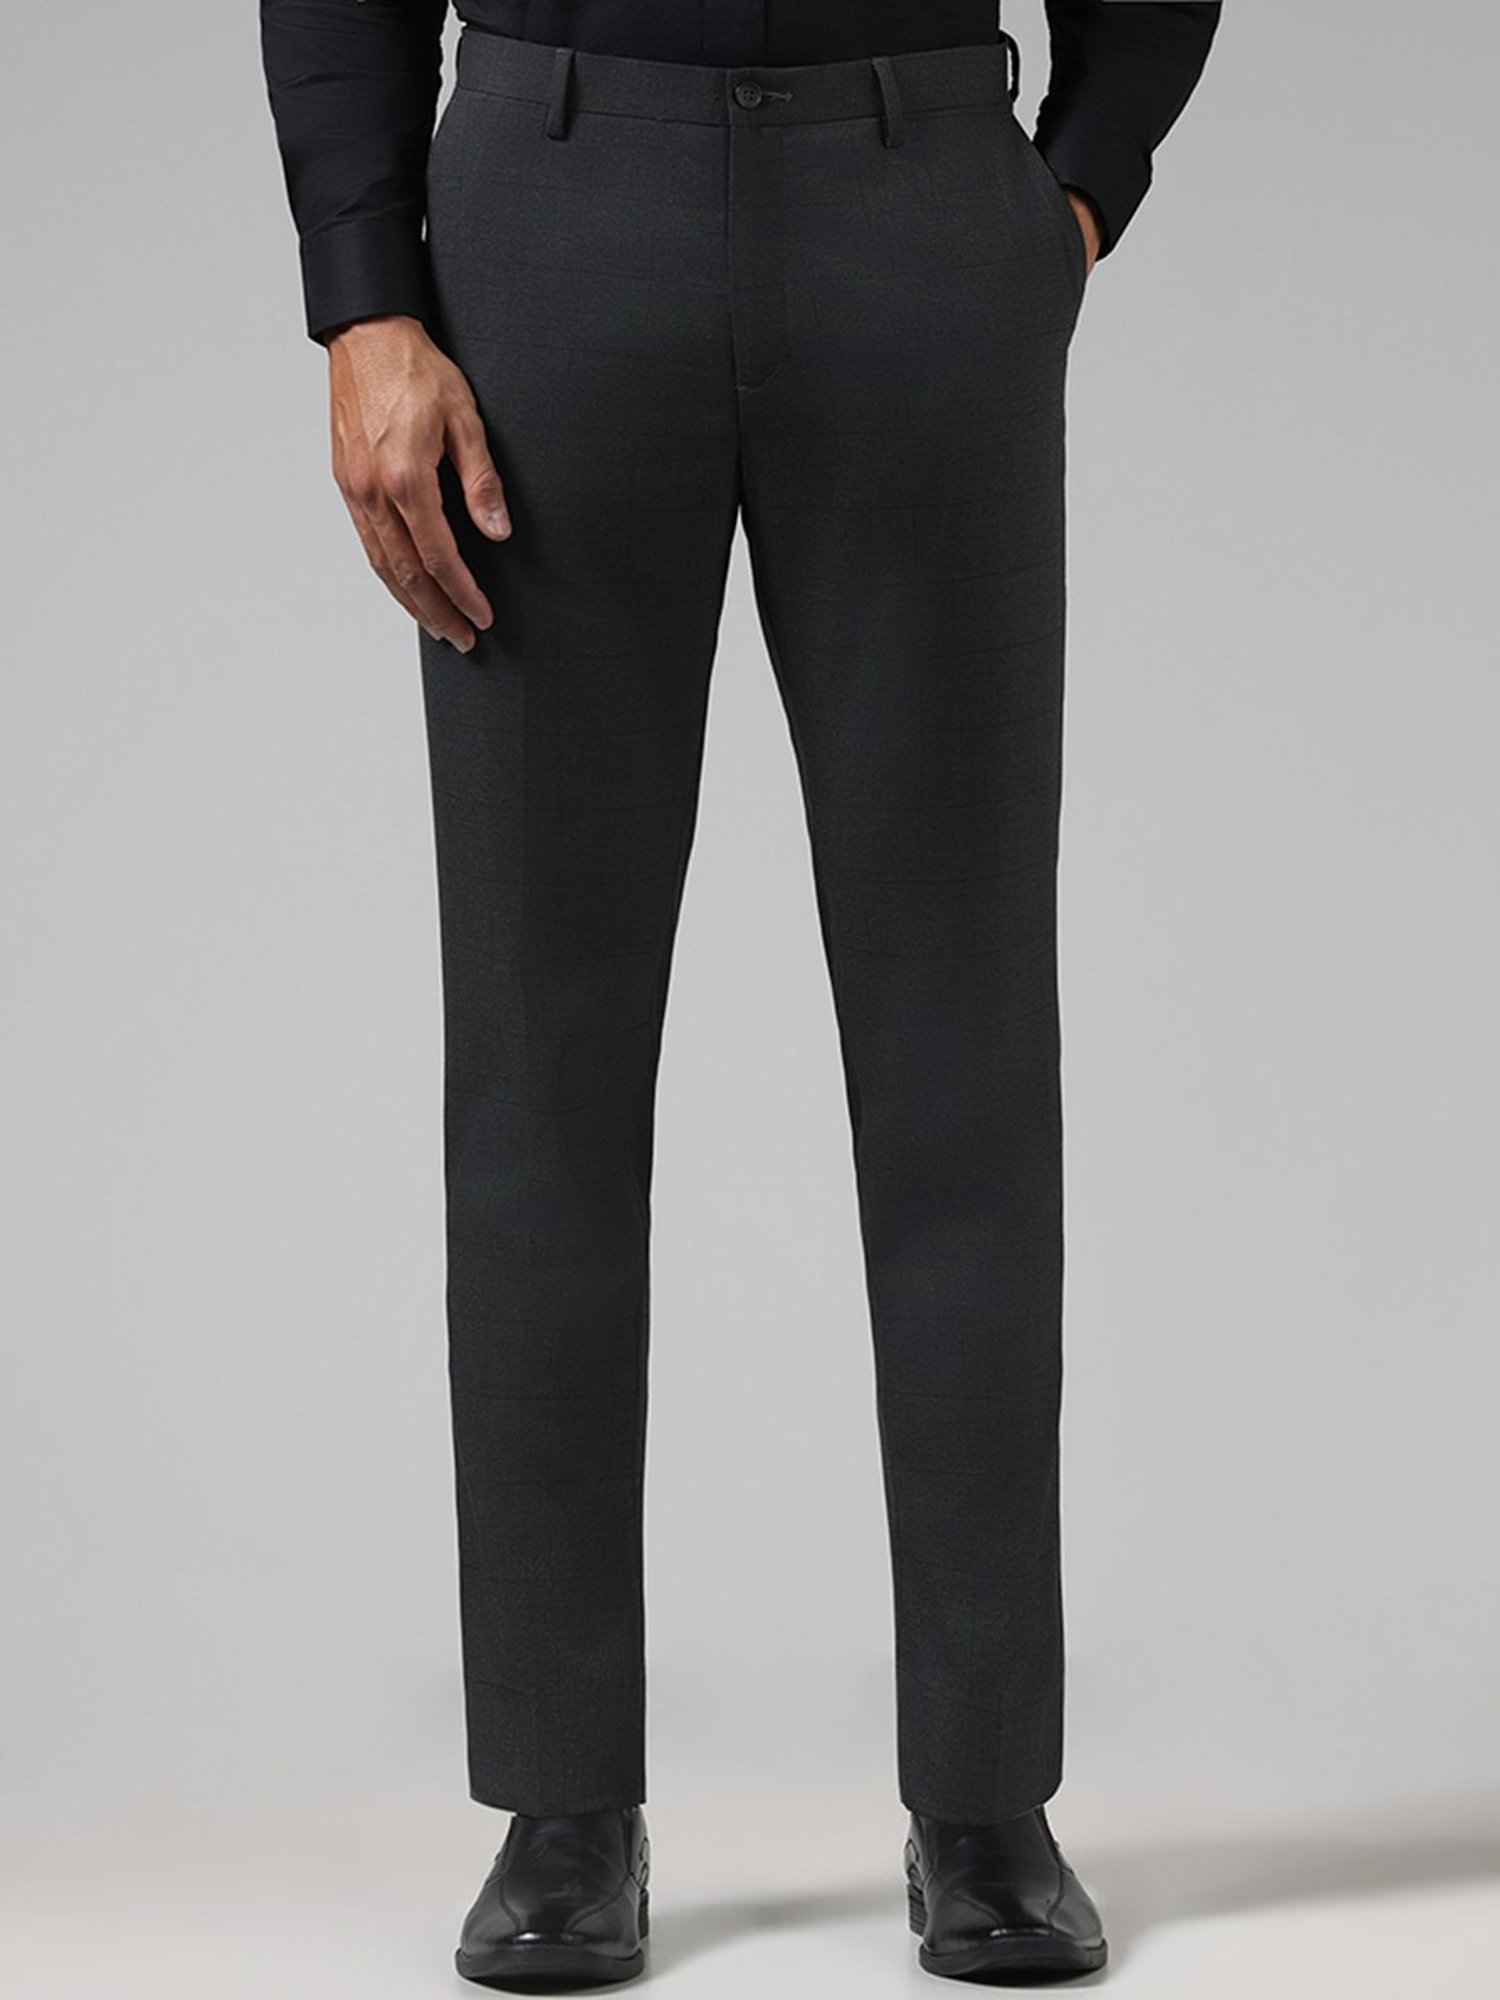 Buy WES Formals Navy Carrot-Fit Trousers from Westside